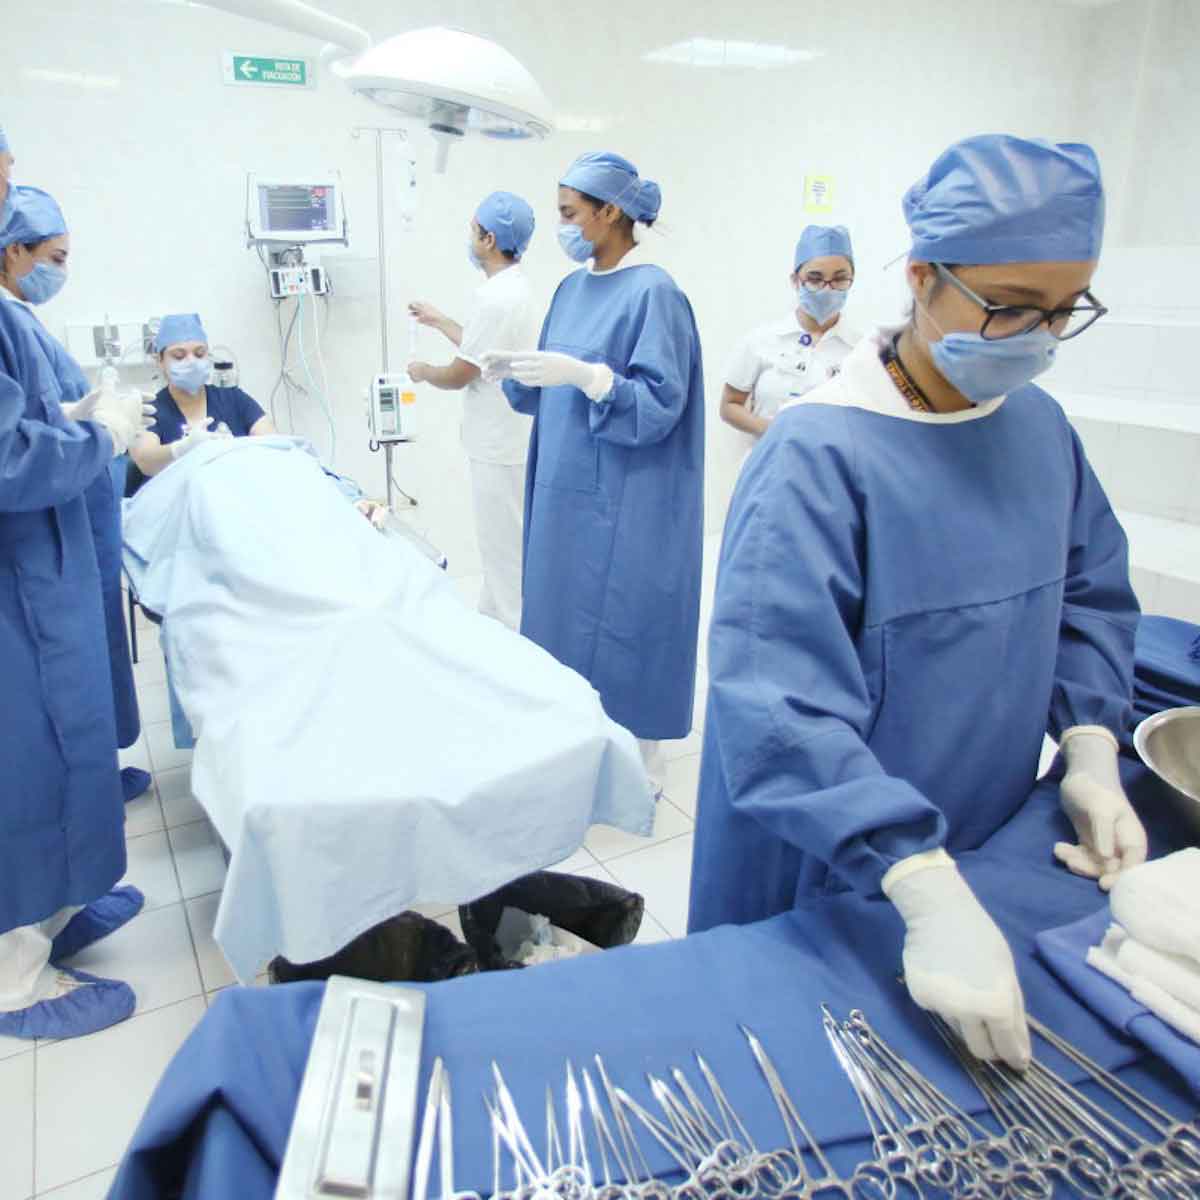 A physician assistant prepares surgical tools in a surgery room with a surgical team in the background. 